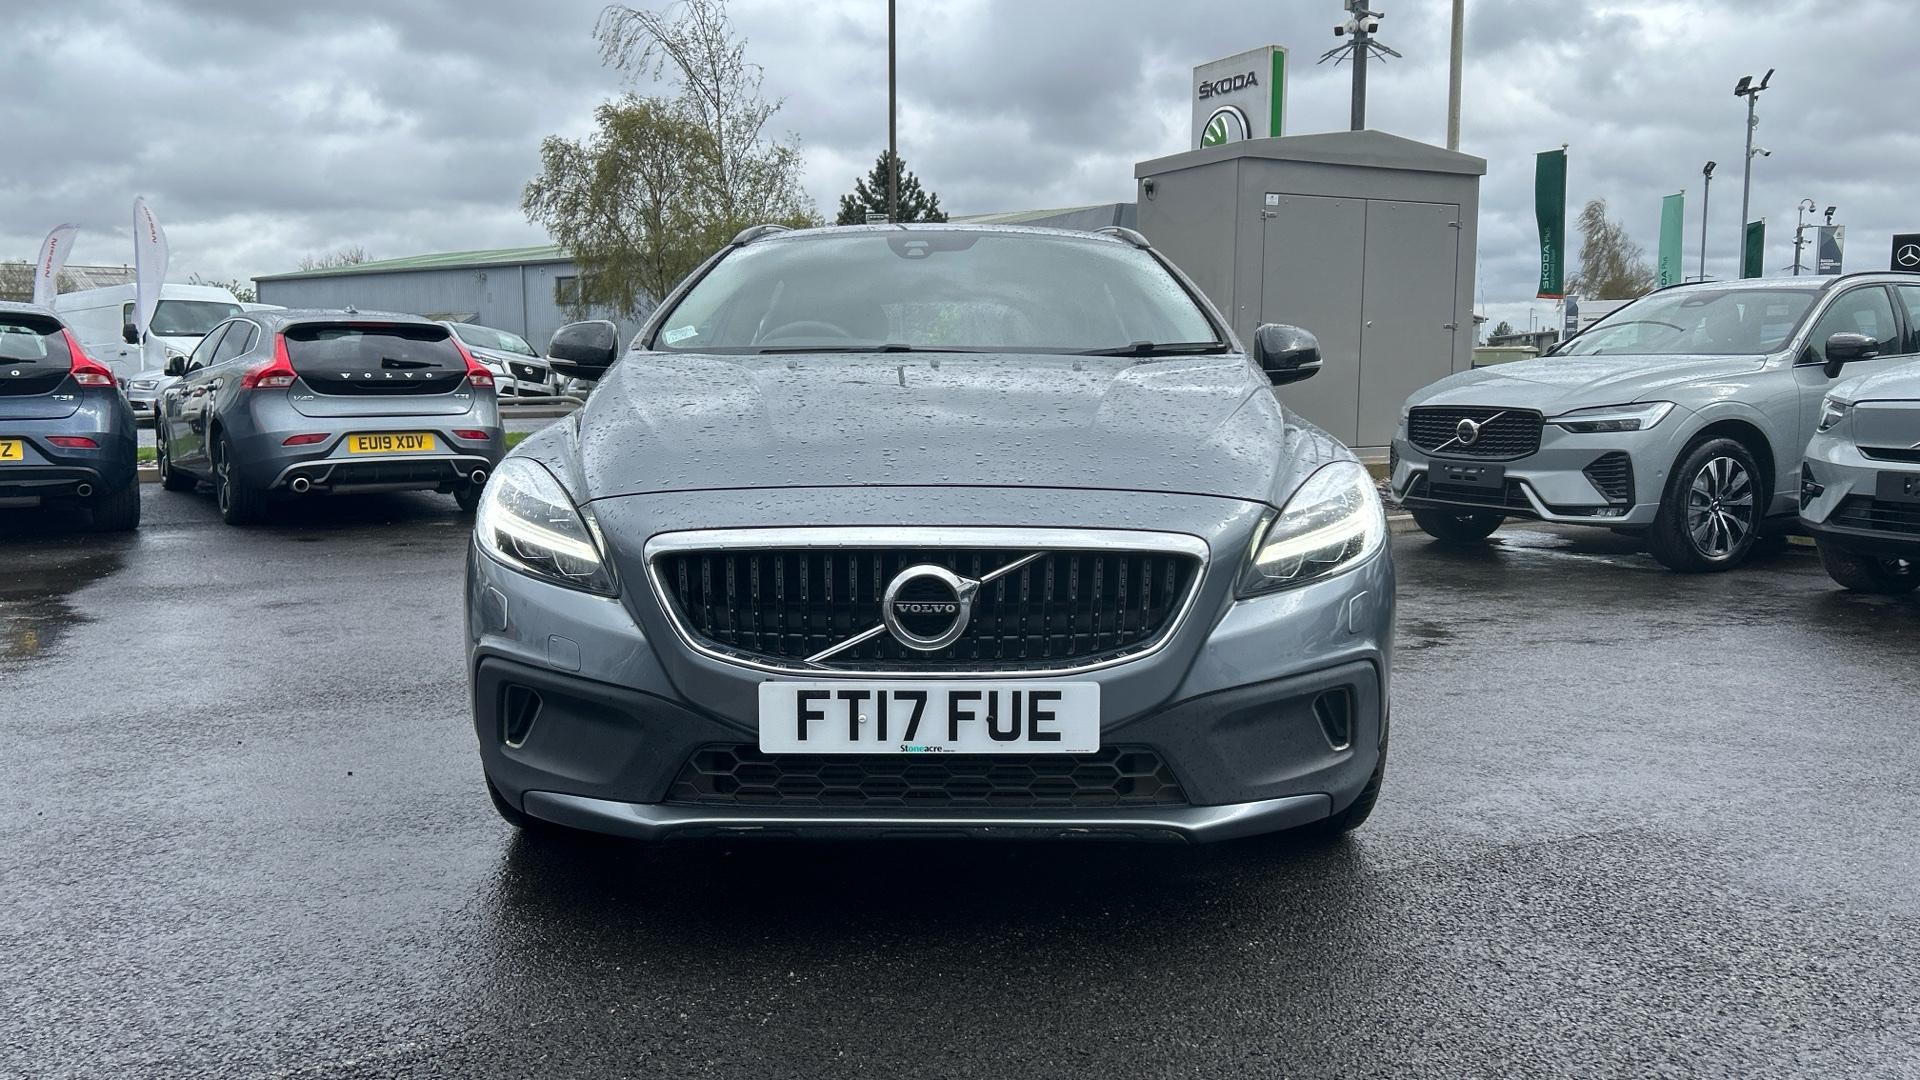 Volvo V40 Cross Country 1.5 T3 Pro Auto Euro 6 (s/s) 5dr (FT17FUE) image 11